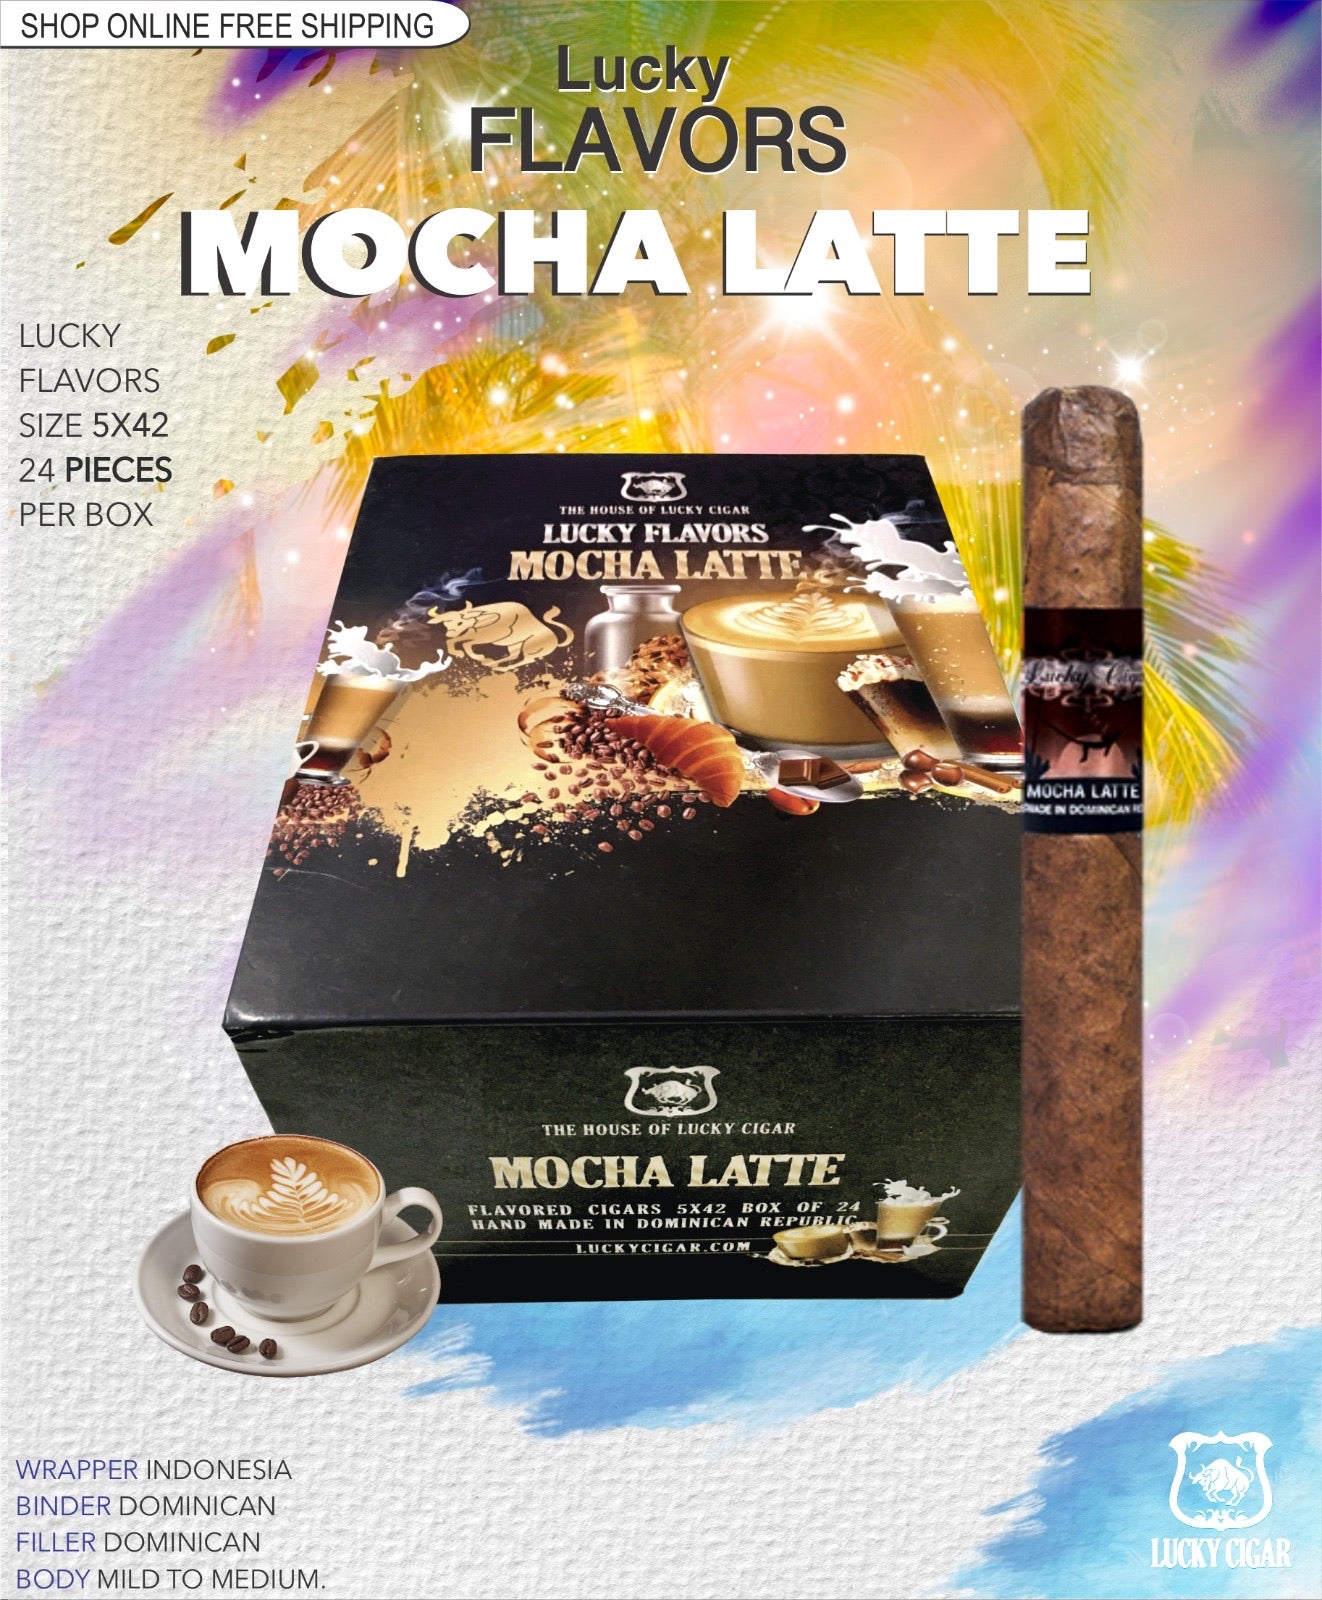 Flavored Cigars: Lucky Flavors Mocha Latte 5x42 Box of 24 Cigars